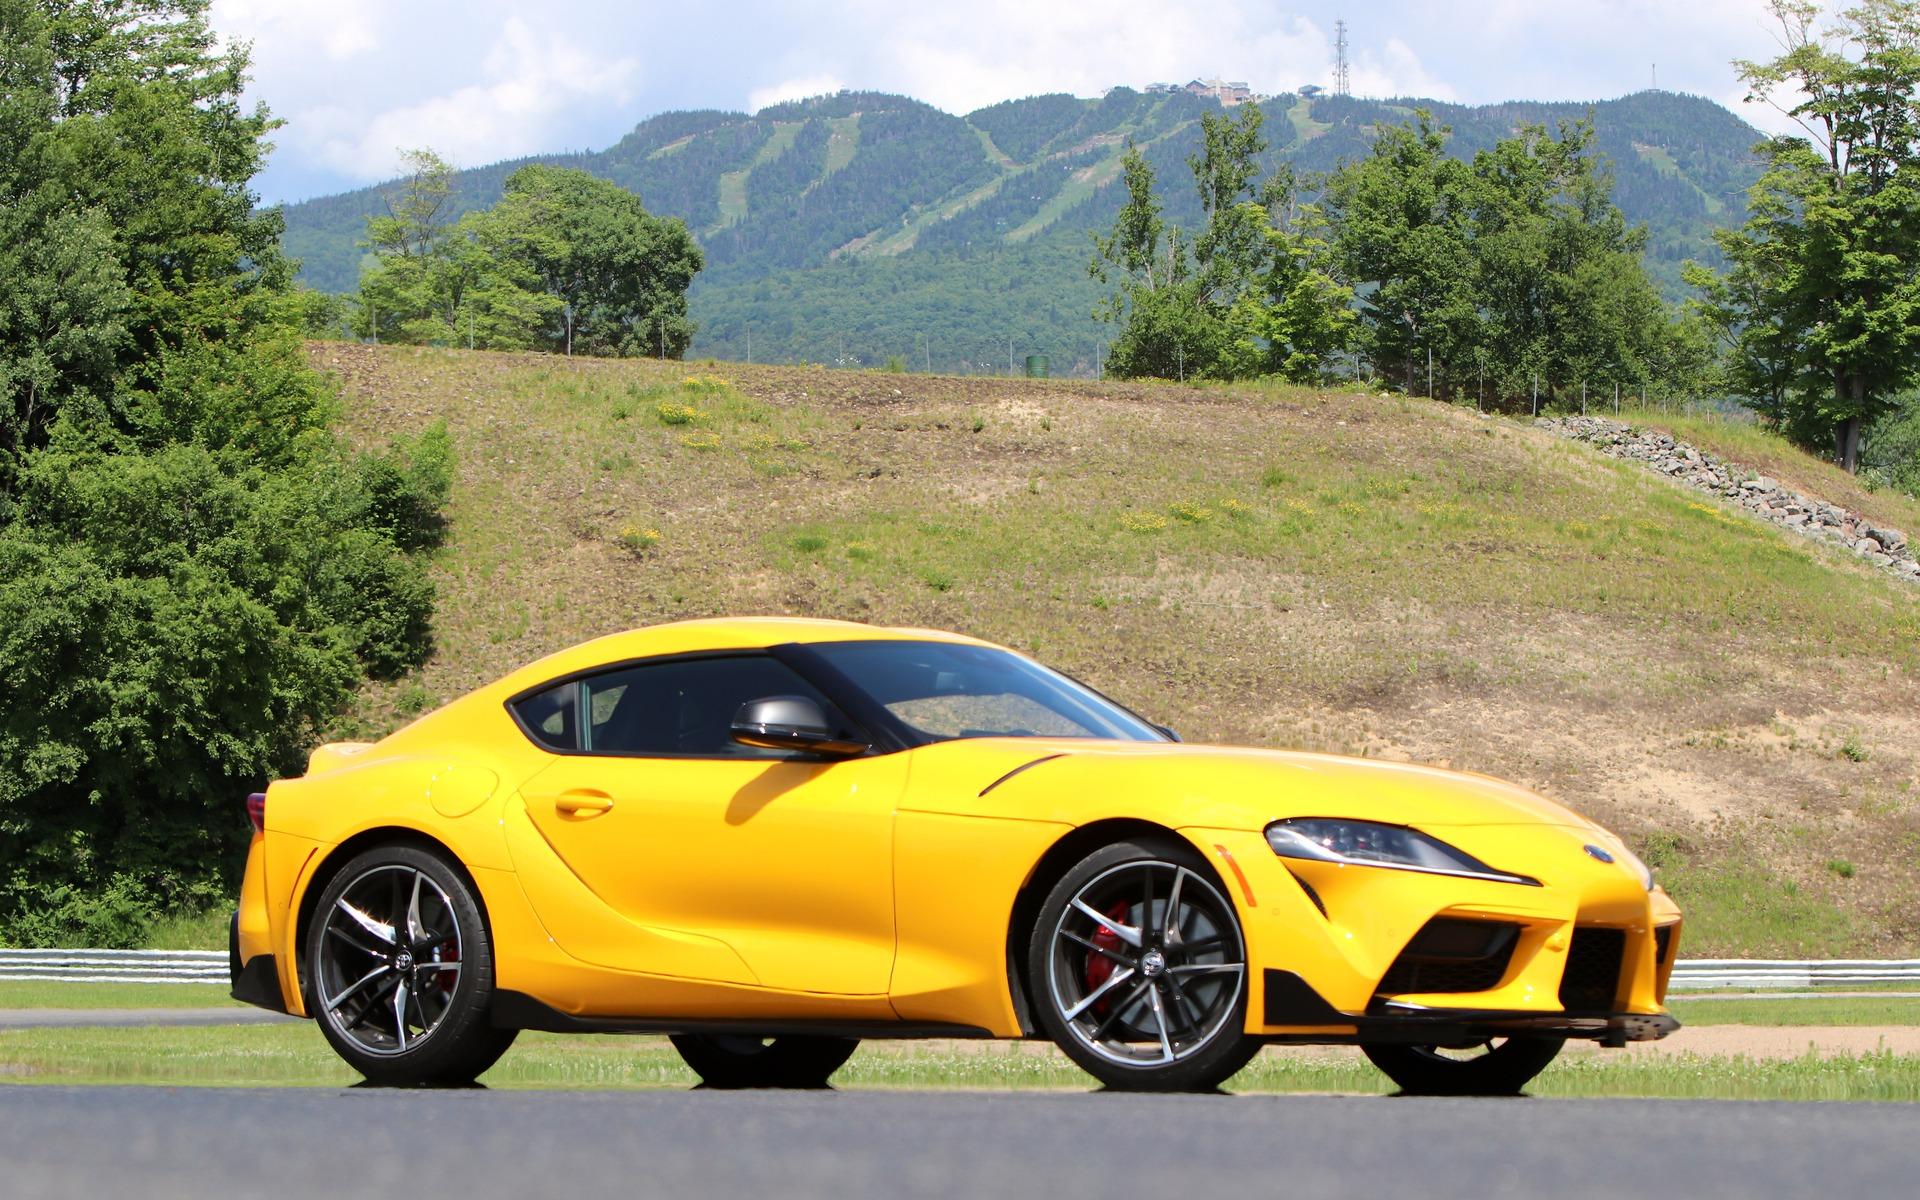 Toyota GR Supra: Teaming up for the Greater Good Car Guide